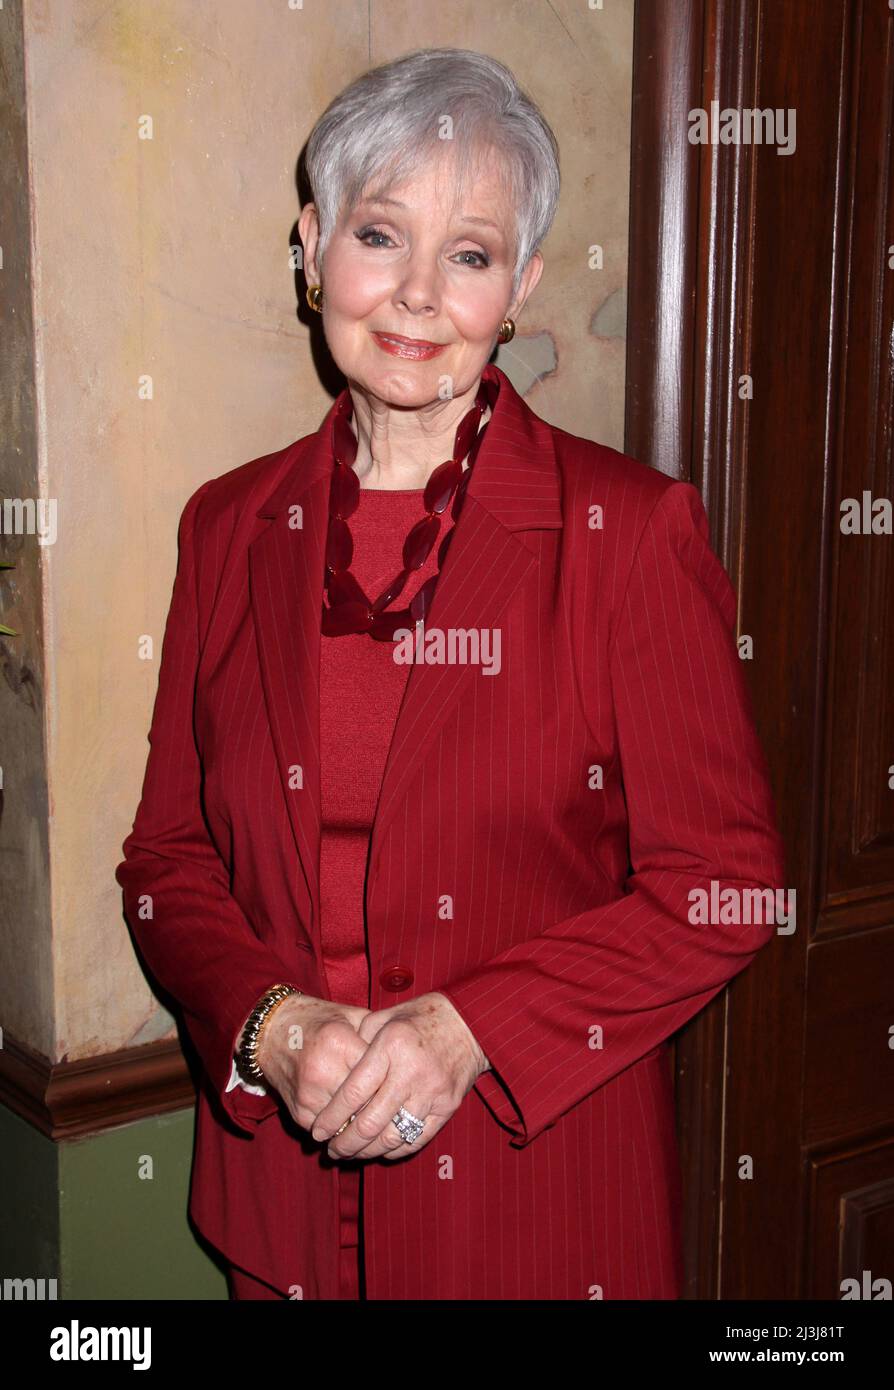 Kathryn Hays, soap opera actress on 'As the World Turns' for 38 years passed away on March 25 in Fairfield, Conn. at the age of 87.  Kathryn Hays As The World Turns 56th Anniversary Party. Held on the studio floor on April 2, 2010. ©Steven Bergman / AFF-USA.COM Stock Photo